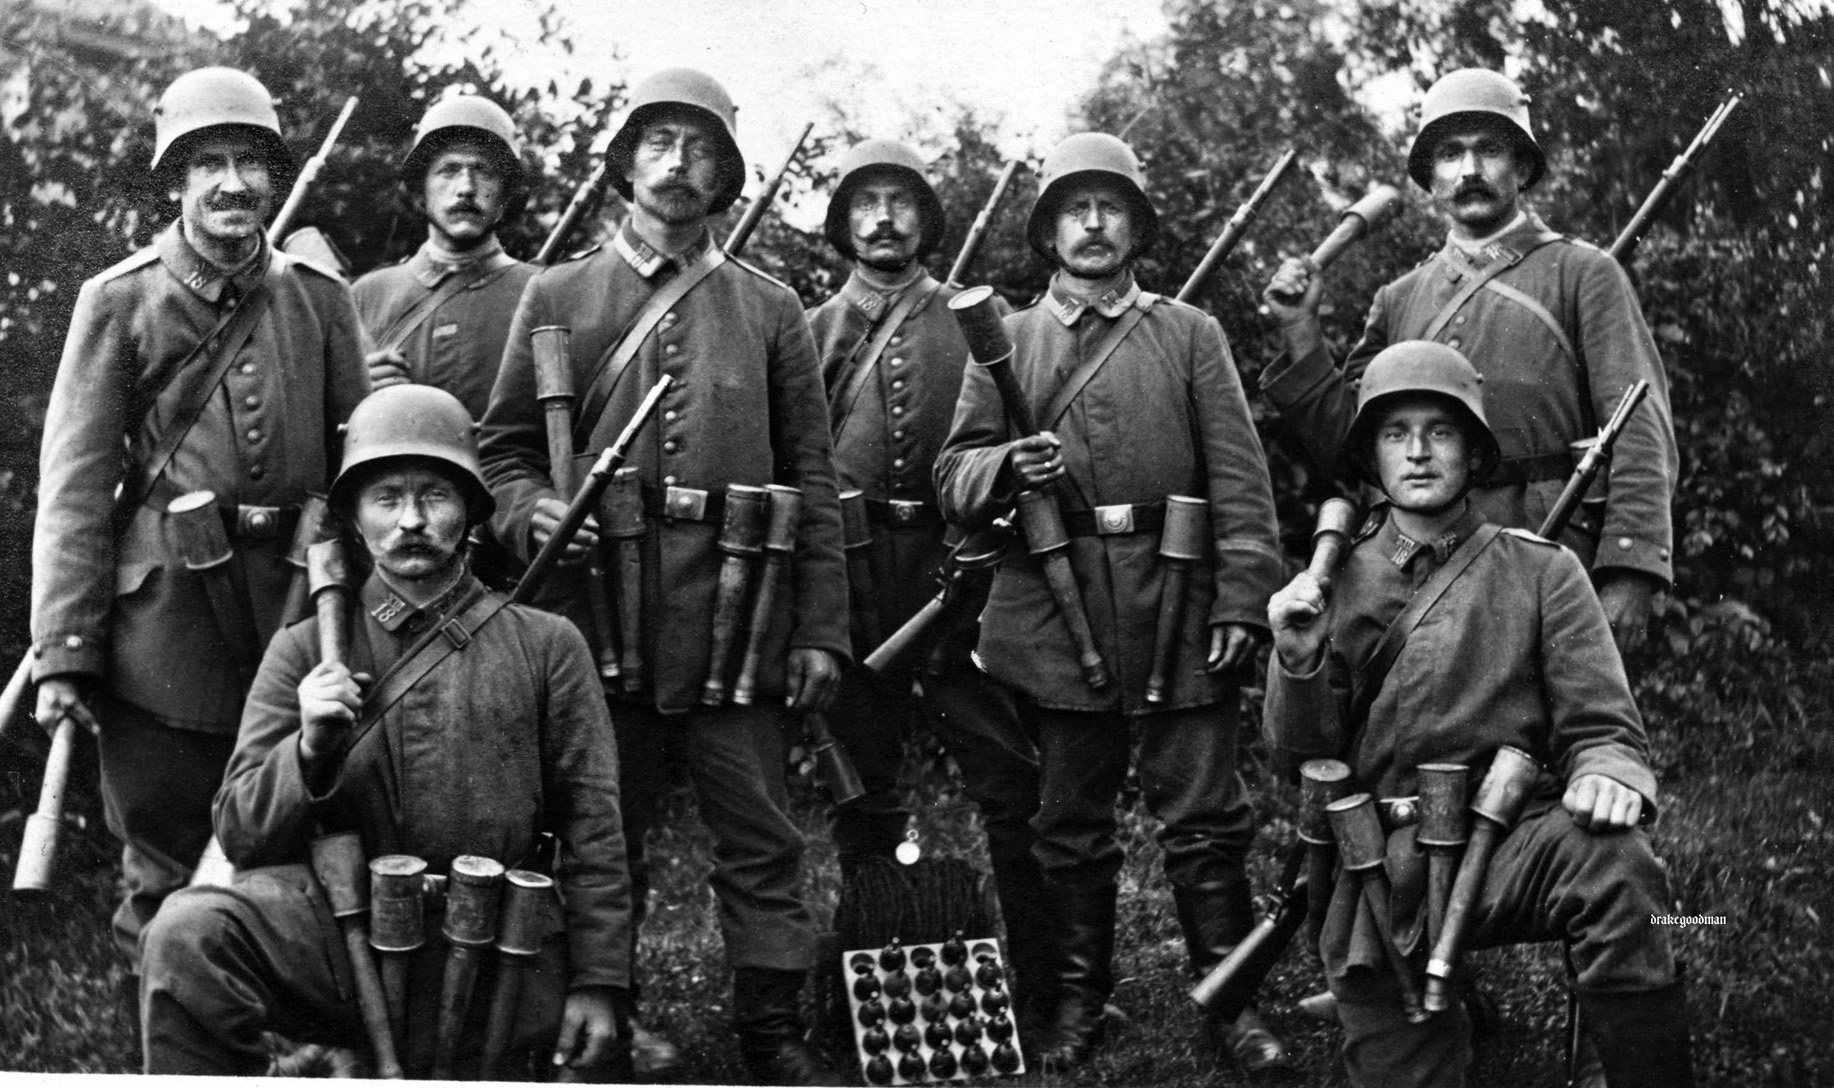 German stormtroopers at Verdun carried stick grenades and wore Stahlhelm steel helmets as they battled their French foes. The battle became even more ghastly in late June when the Germans resorted to firing phosgene gas shells on the French artillery positions.